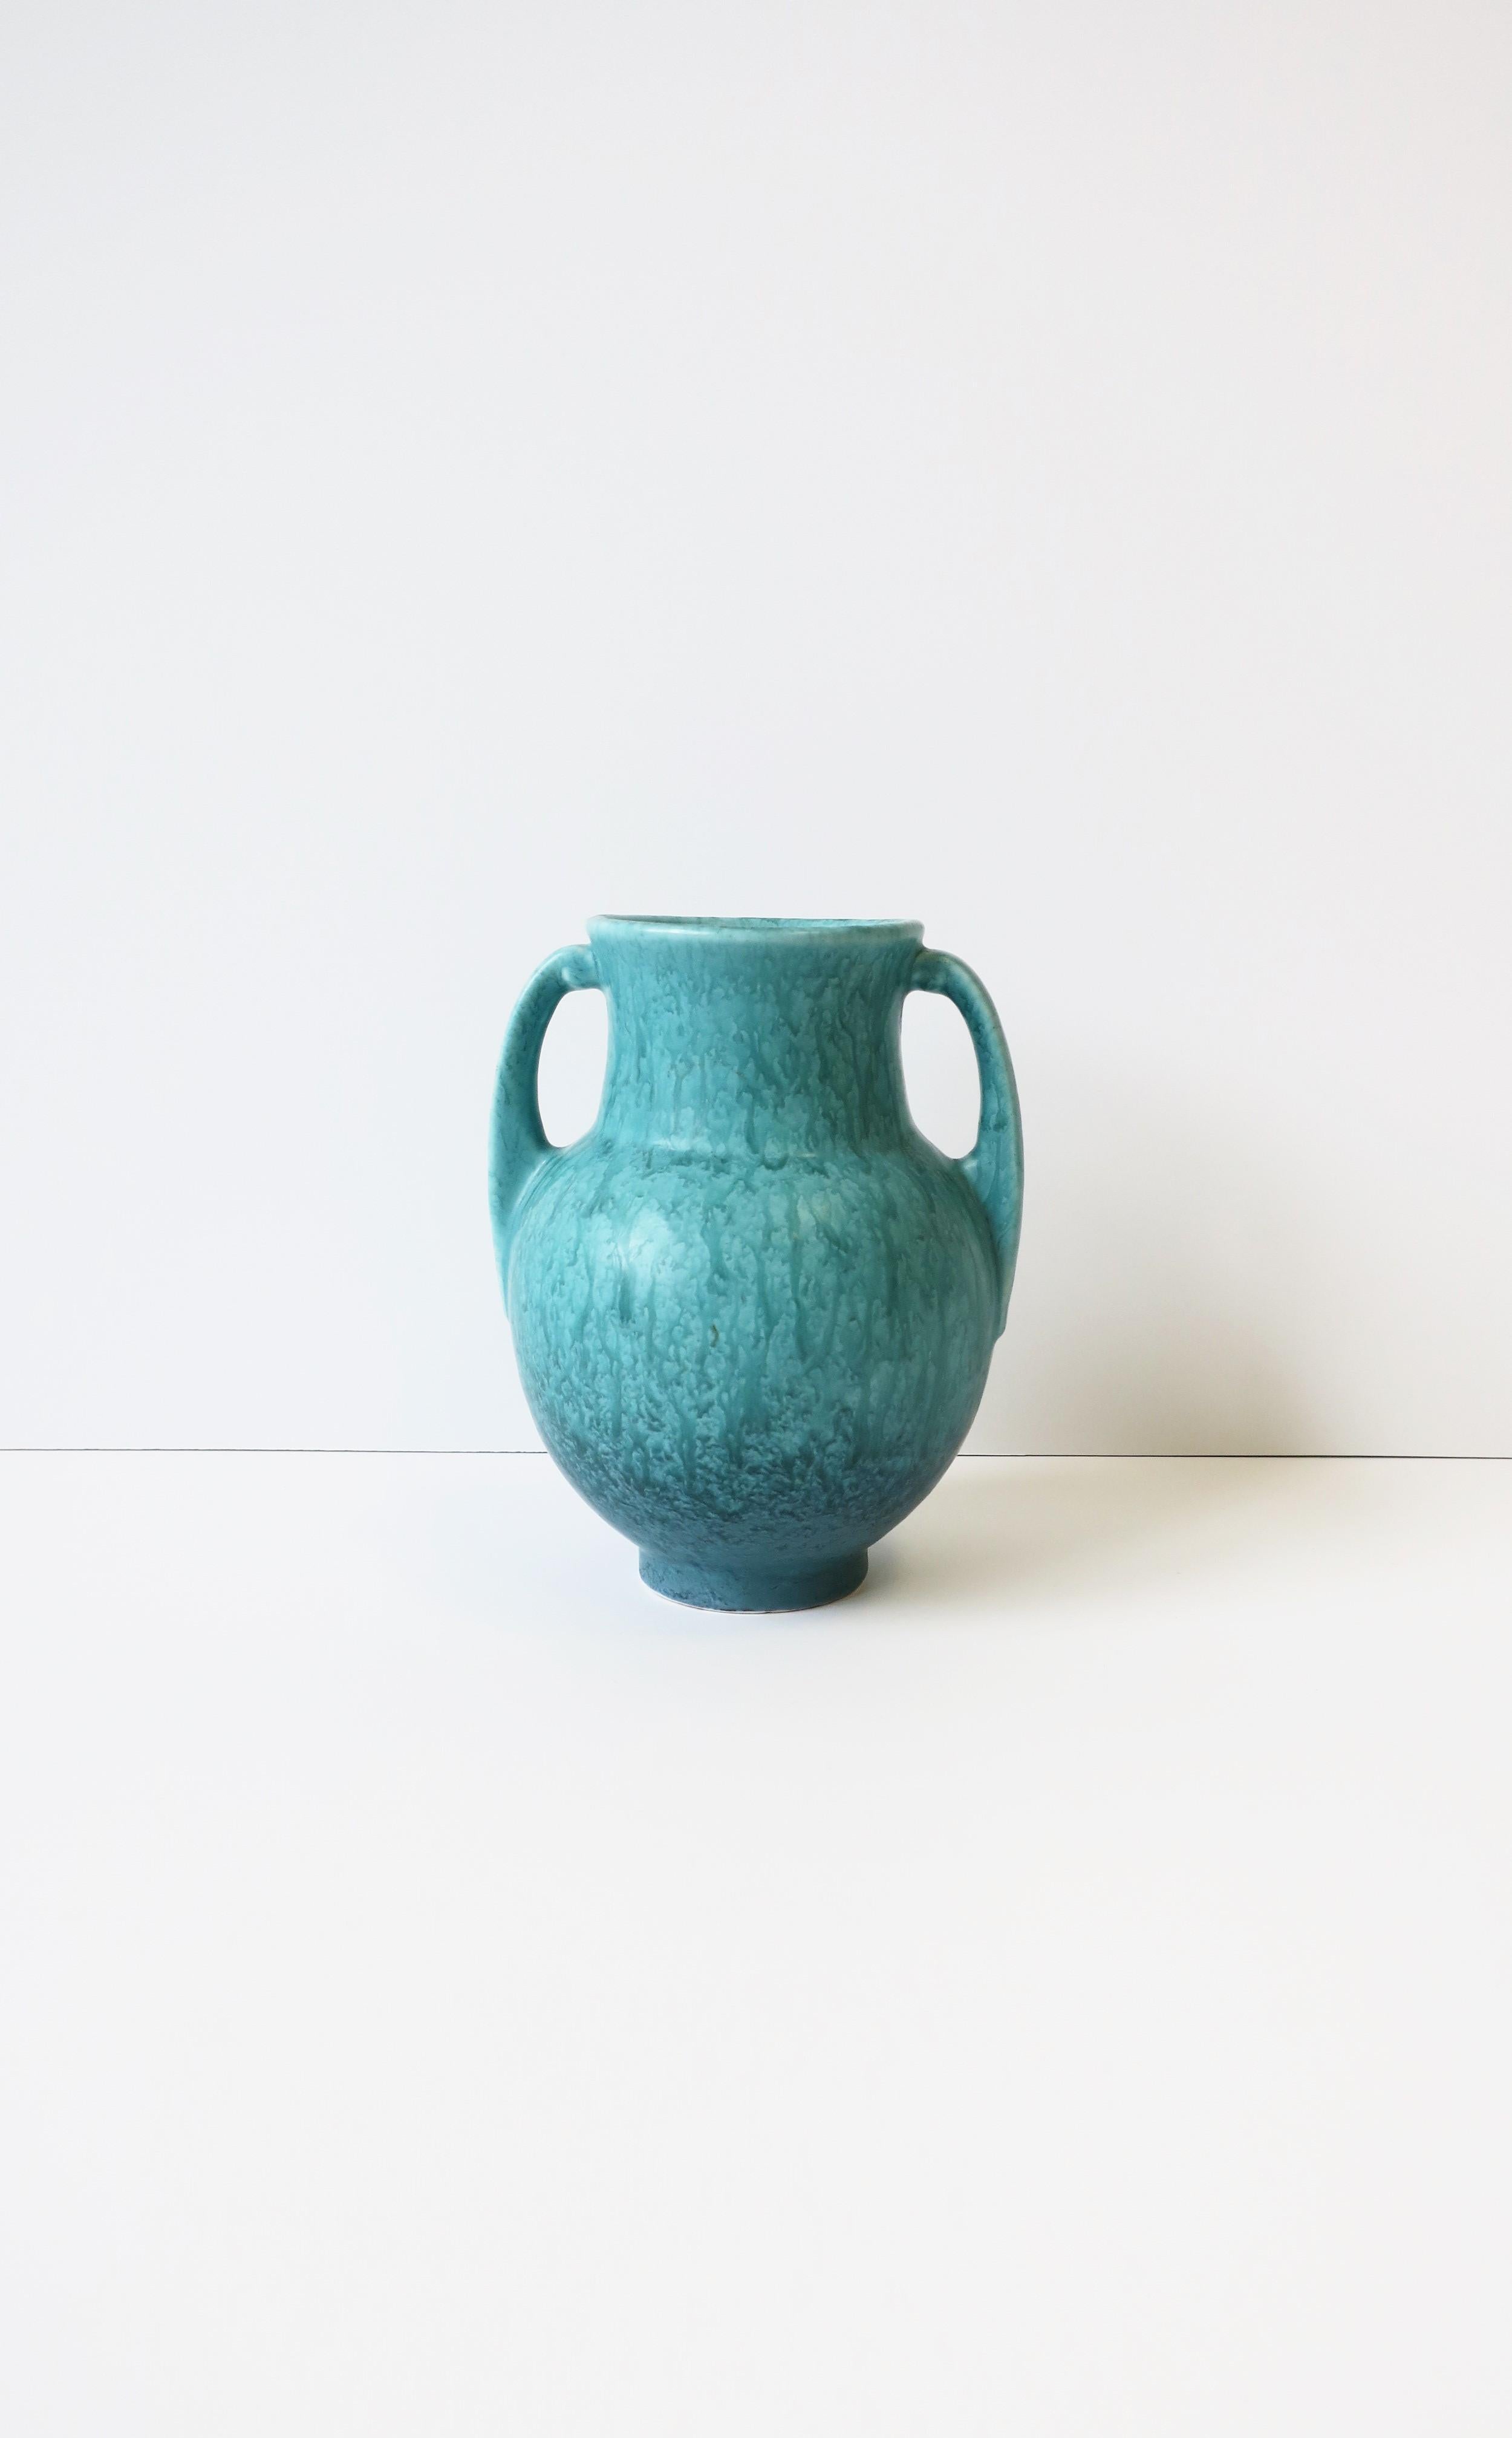 A beautiful Modern turquoise blue Amphora pottery vase, circa early-20th century, USA. Dimensions: 5